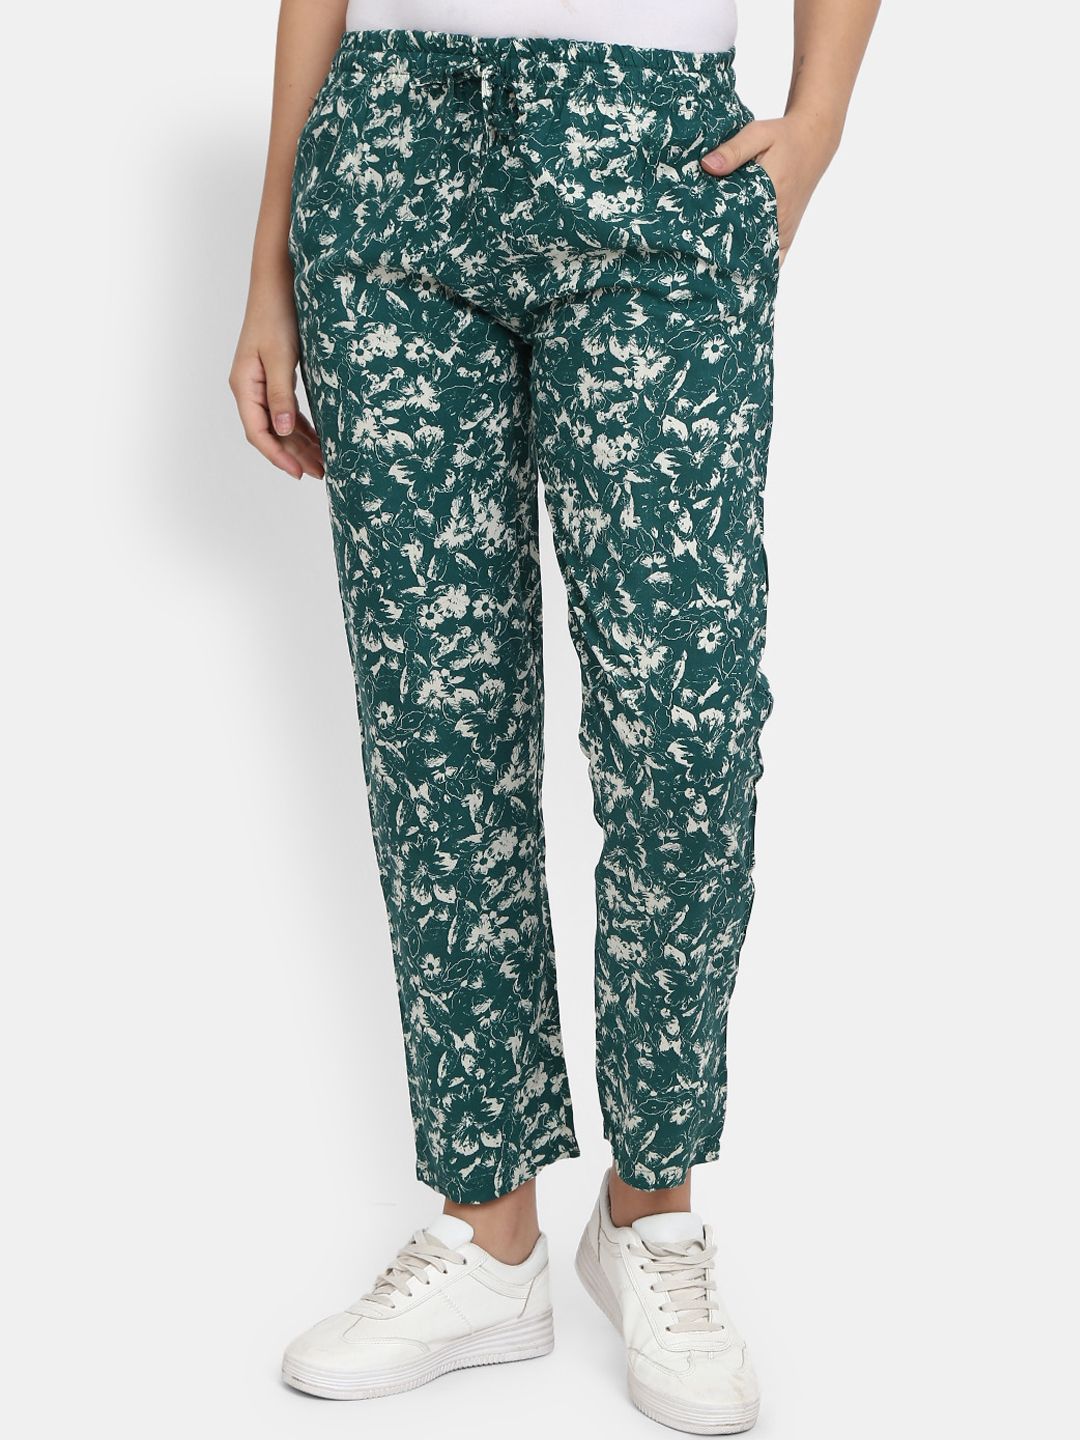 V-Mart Green Printed Lounge Pants Price in India